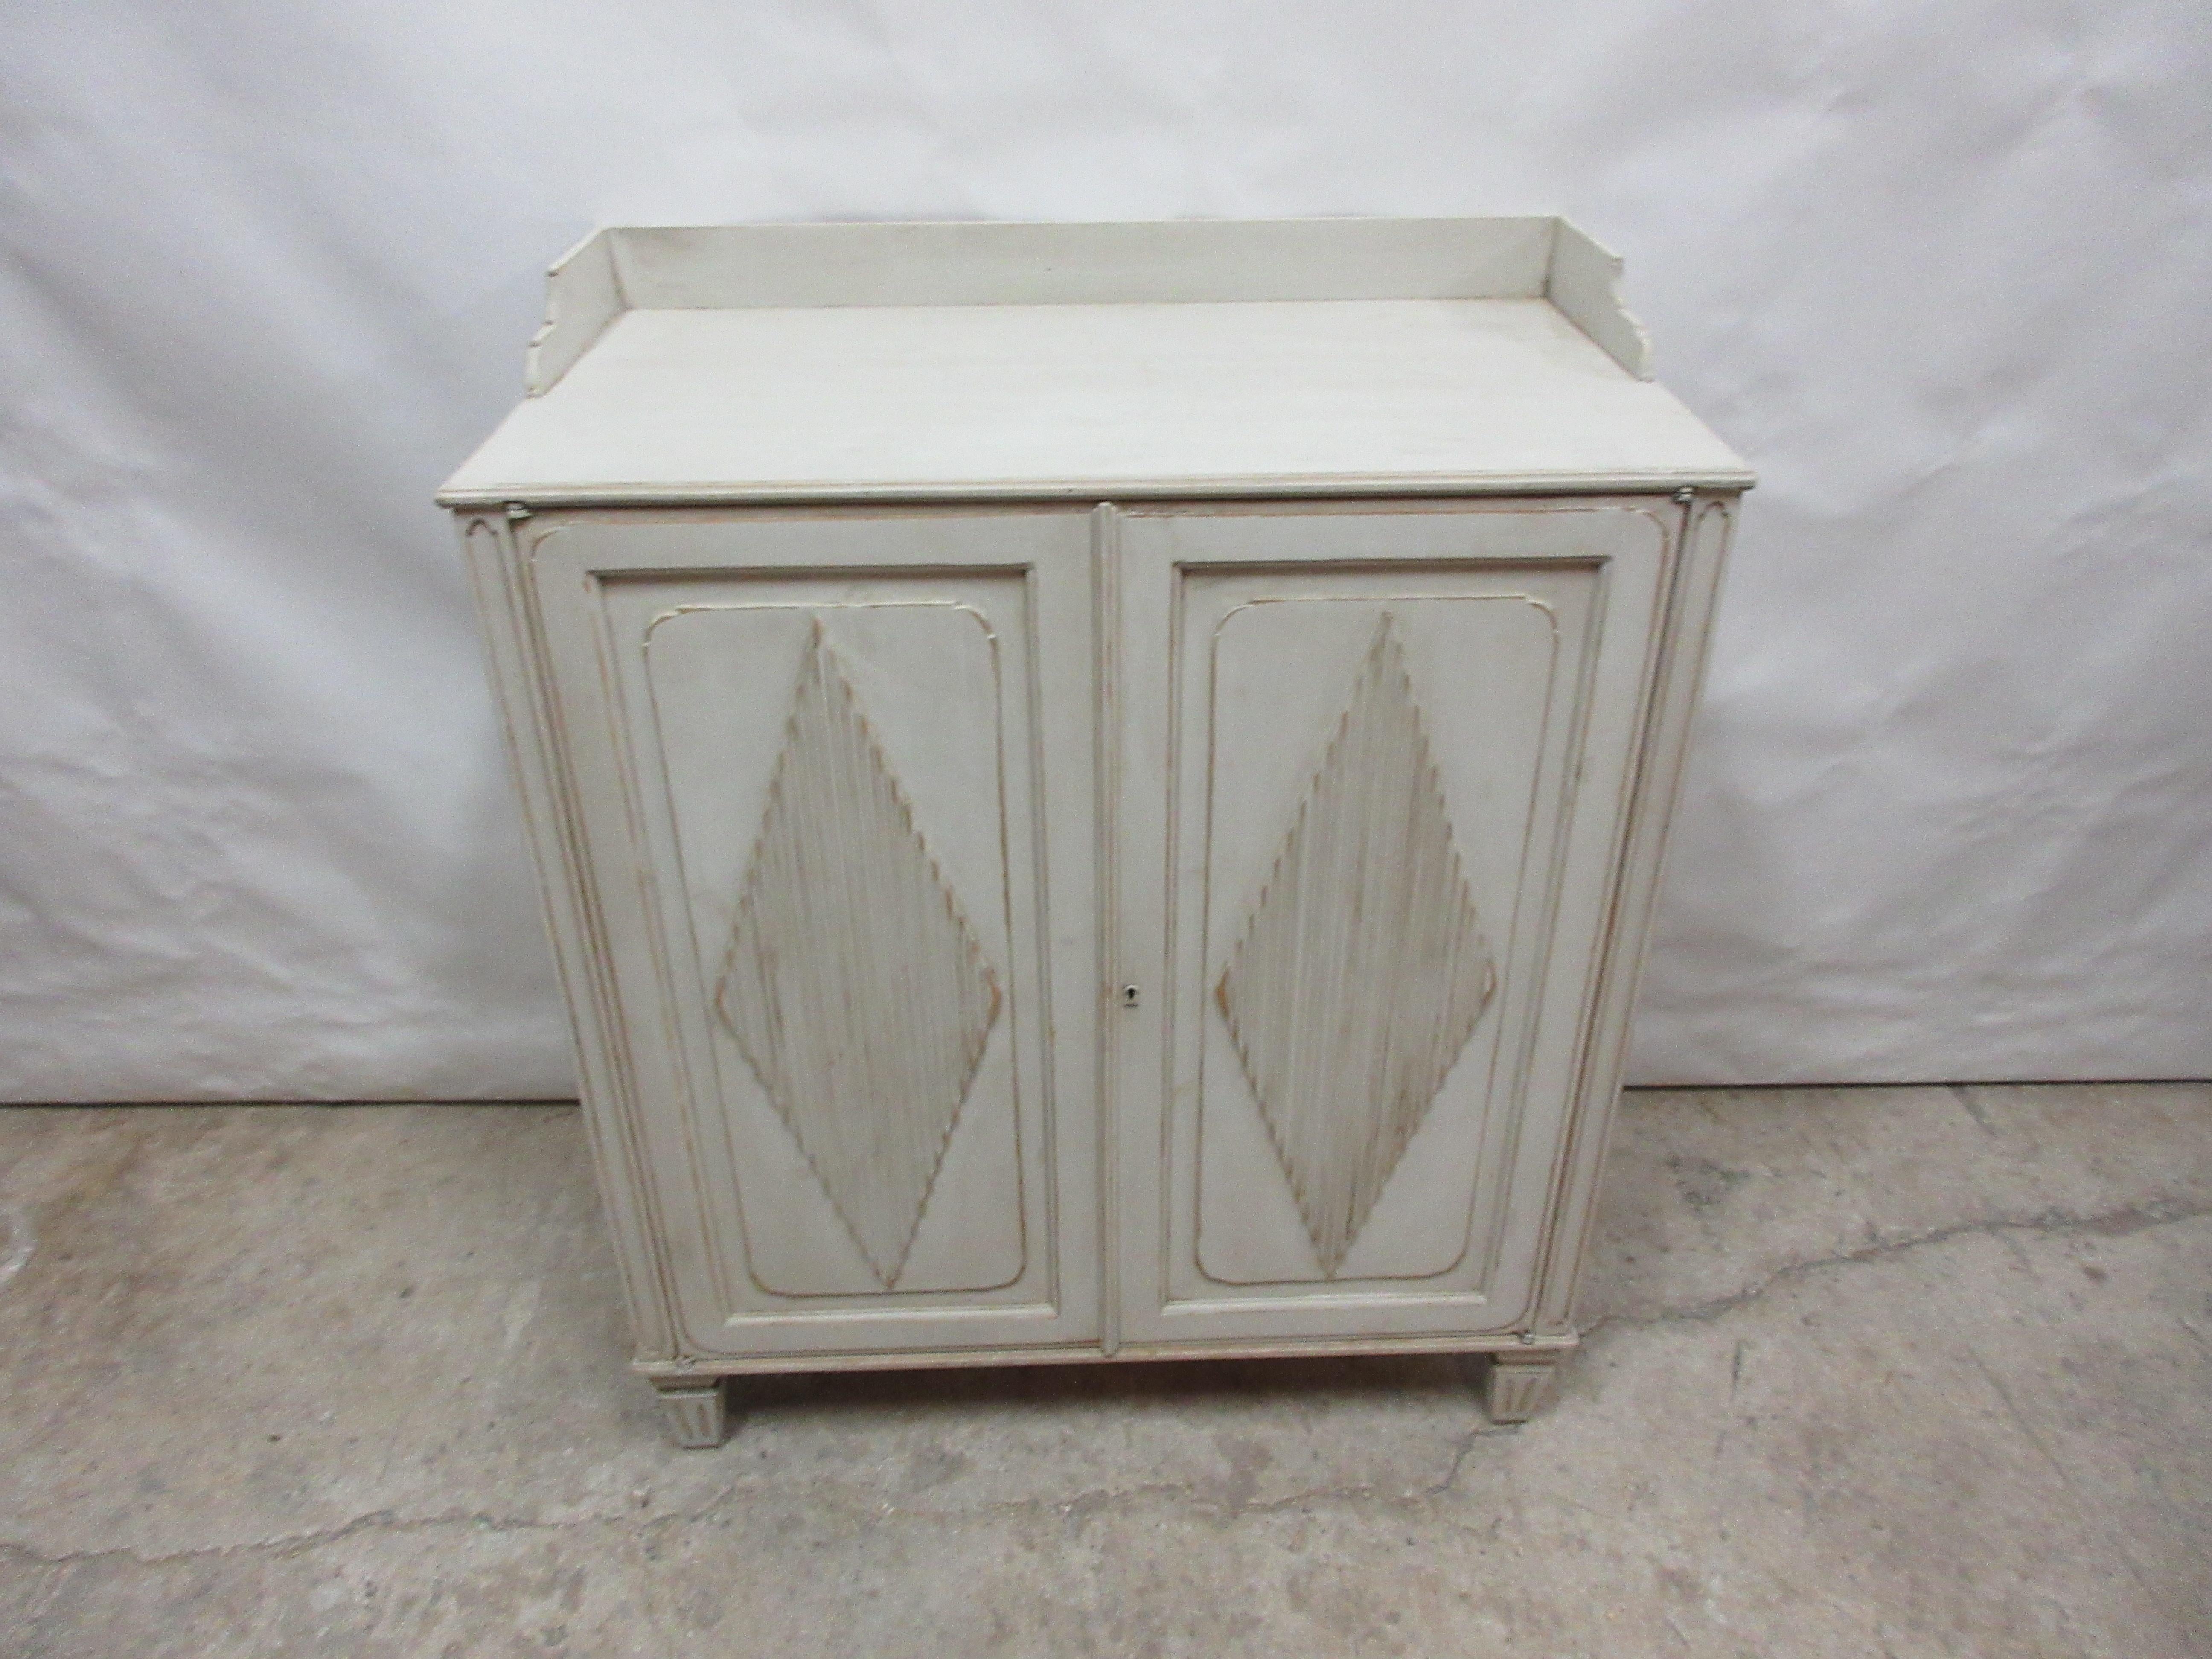 This Swedish Gustavian sideboard was found at an auction in Goteborg, Sweden. Its been restored and repainted with milk paints 